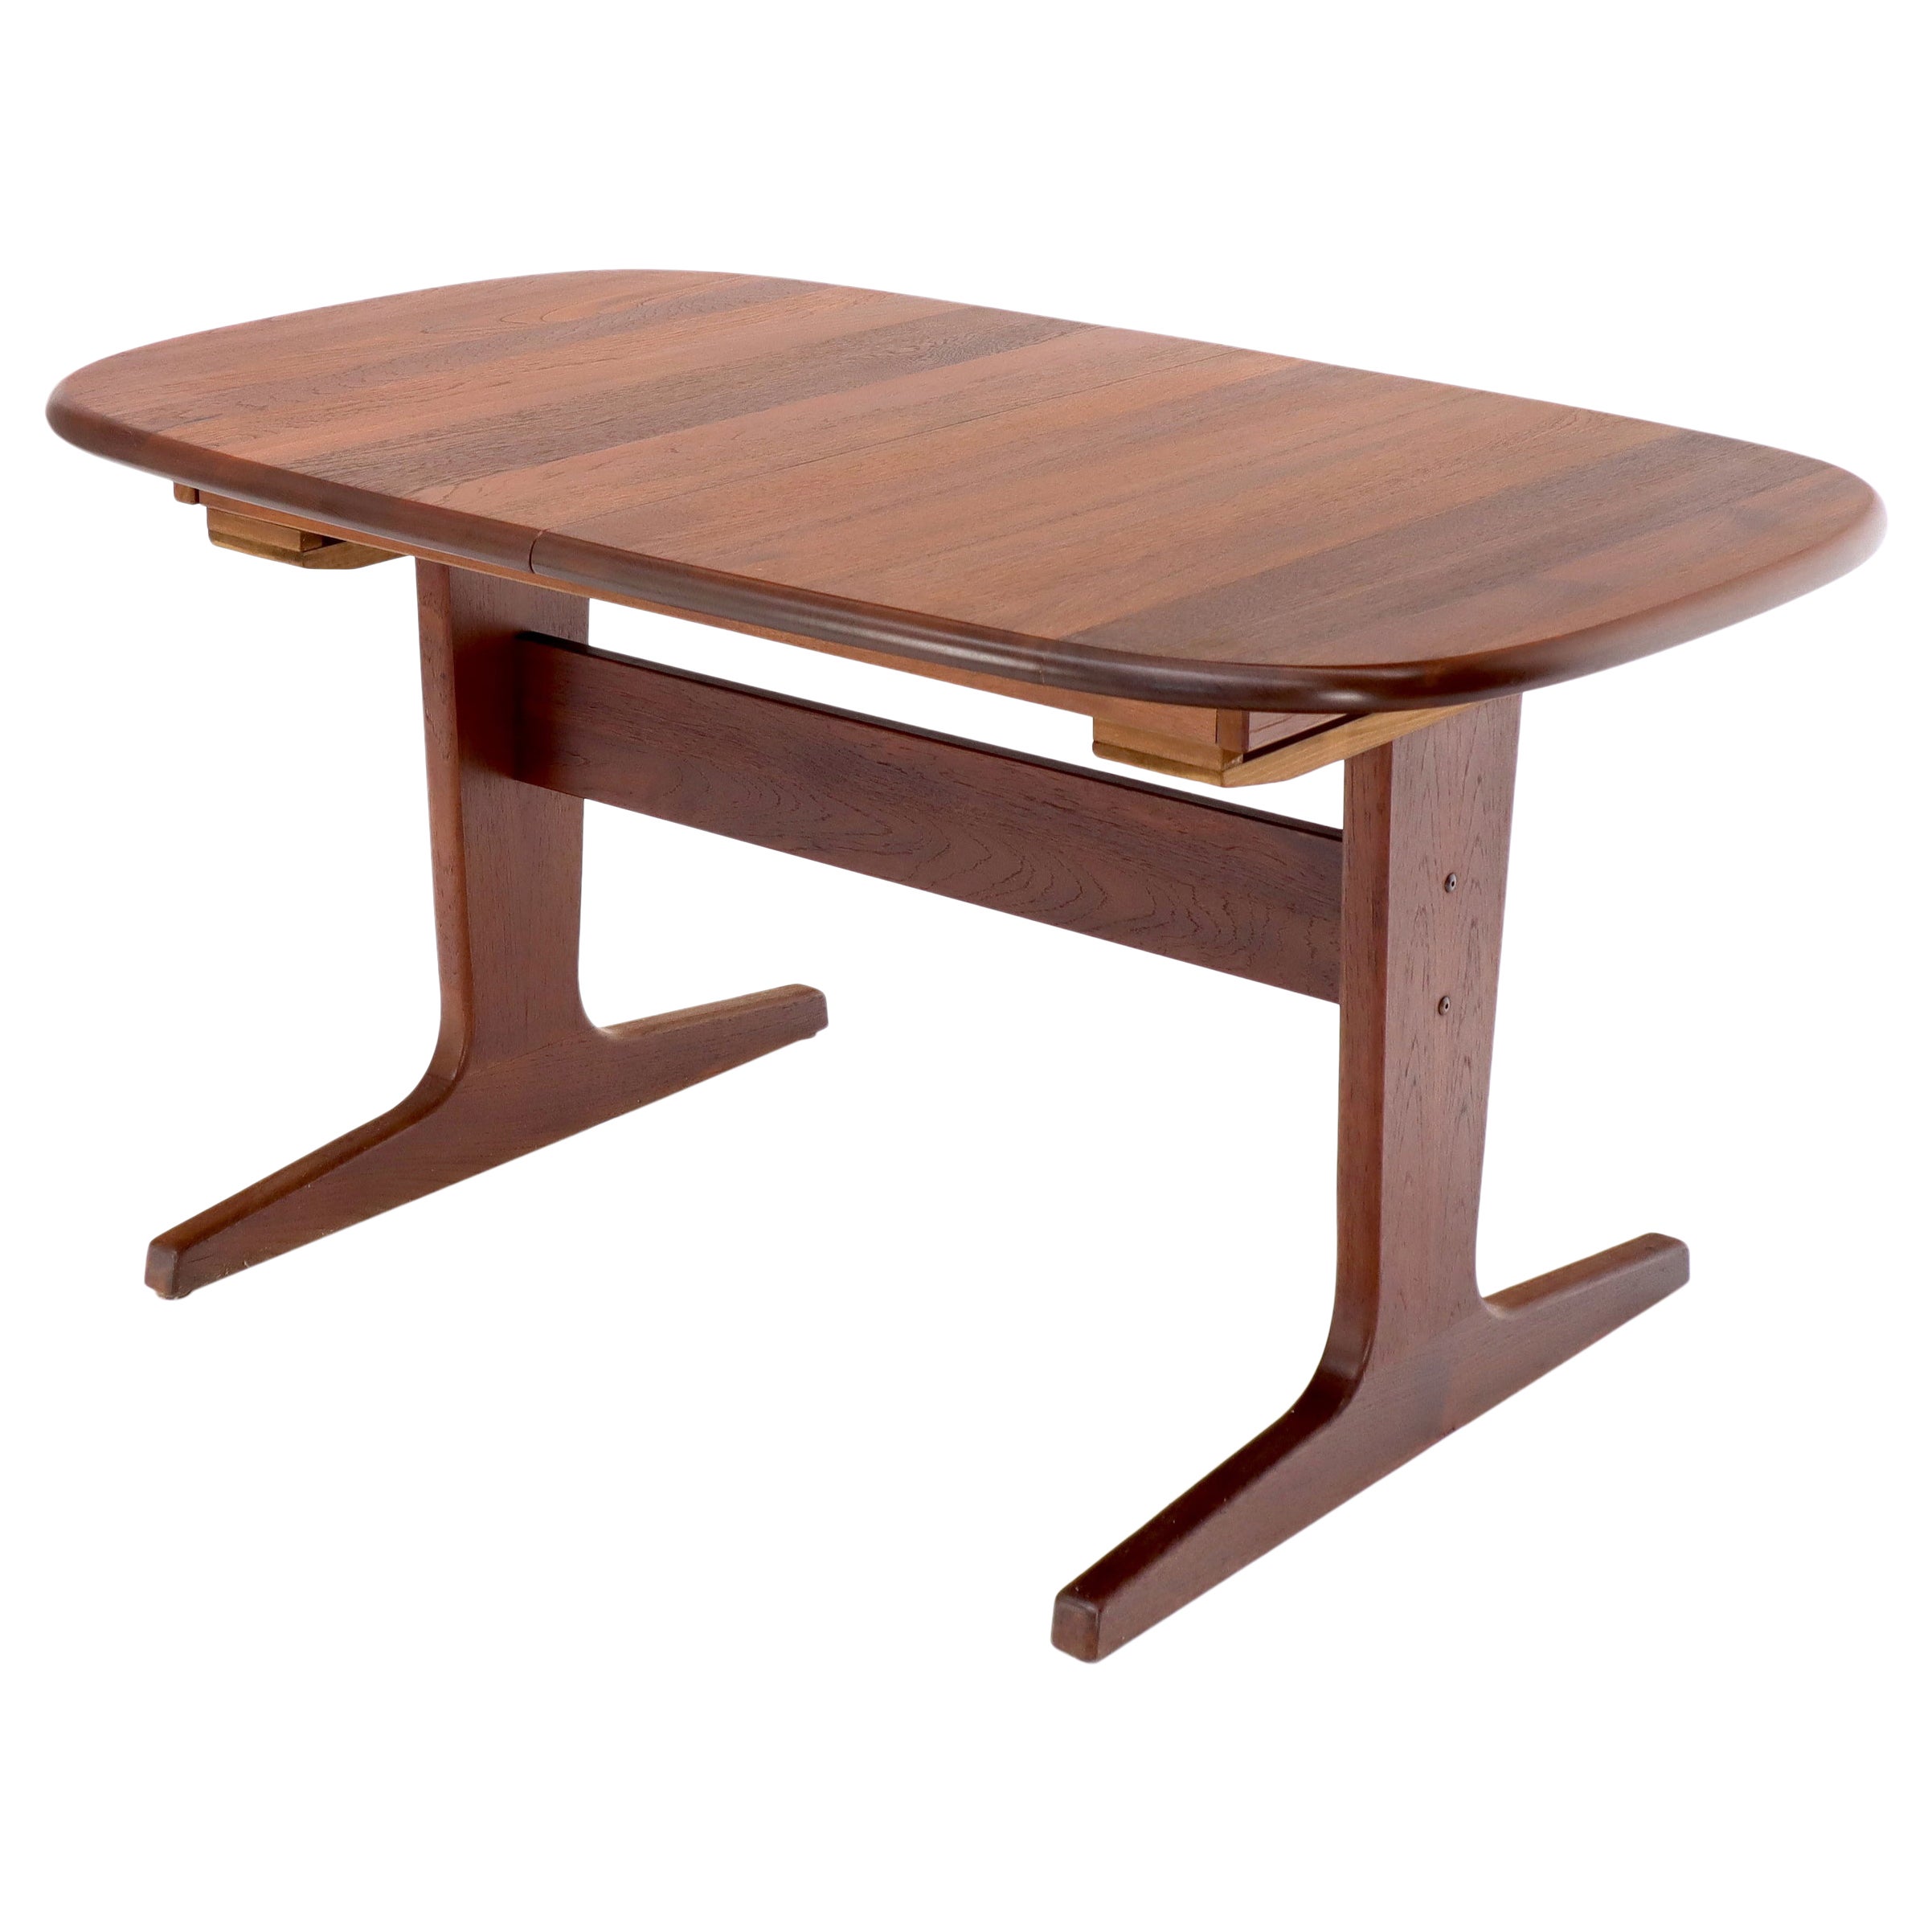 Teak Dining Table Suitable For Small Spaces: Compact And Functional